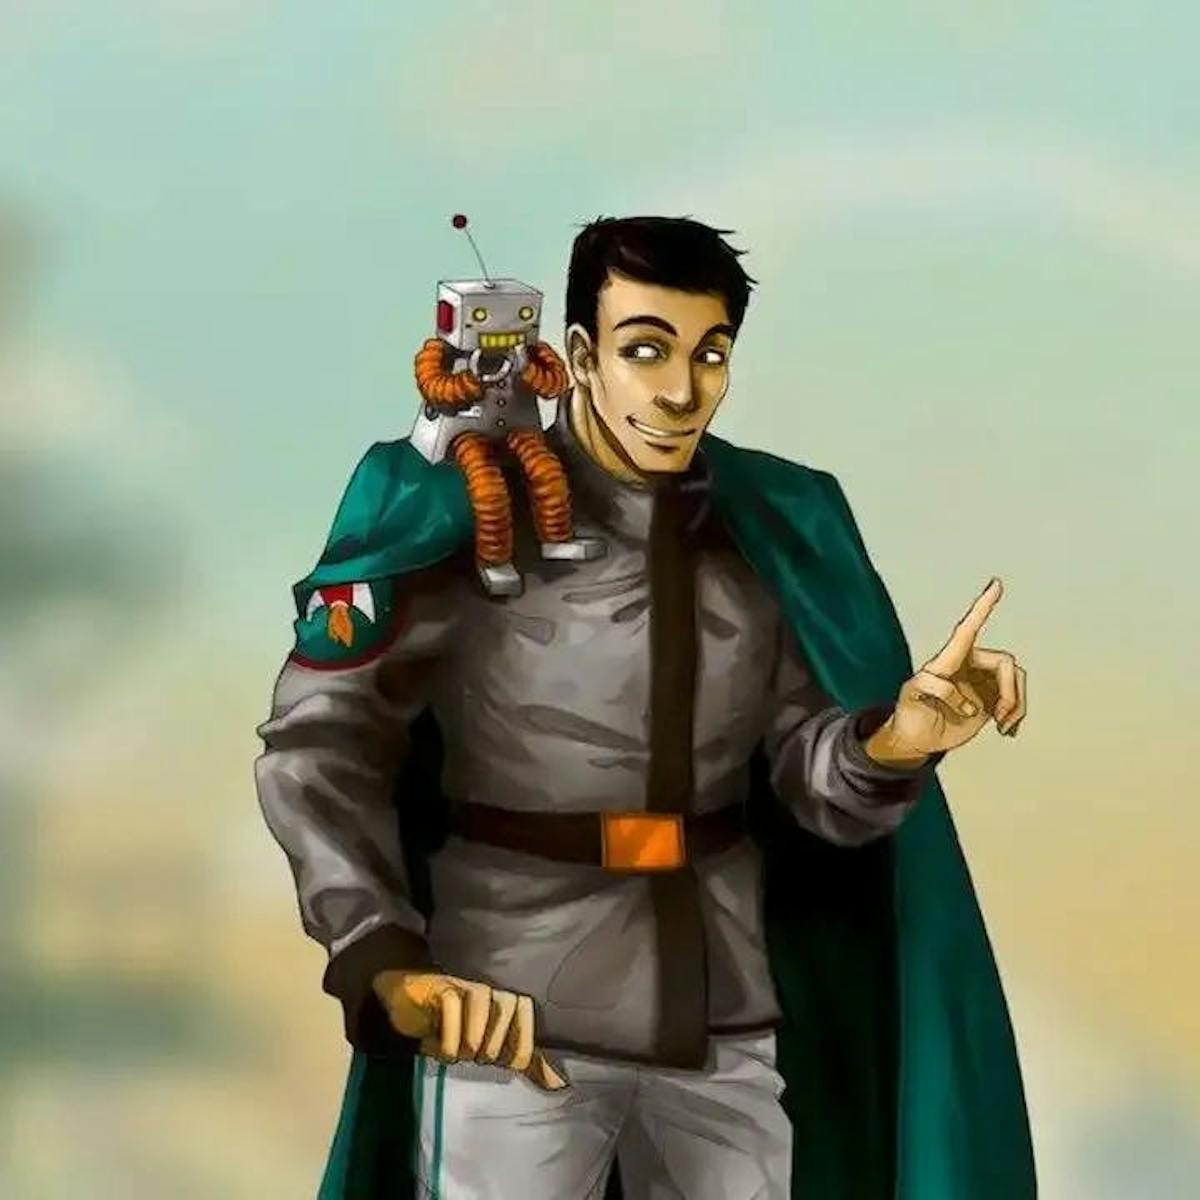 Illustration of Keith Walker wearing a green cape with a small robot on his shoulder